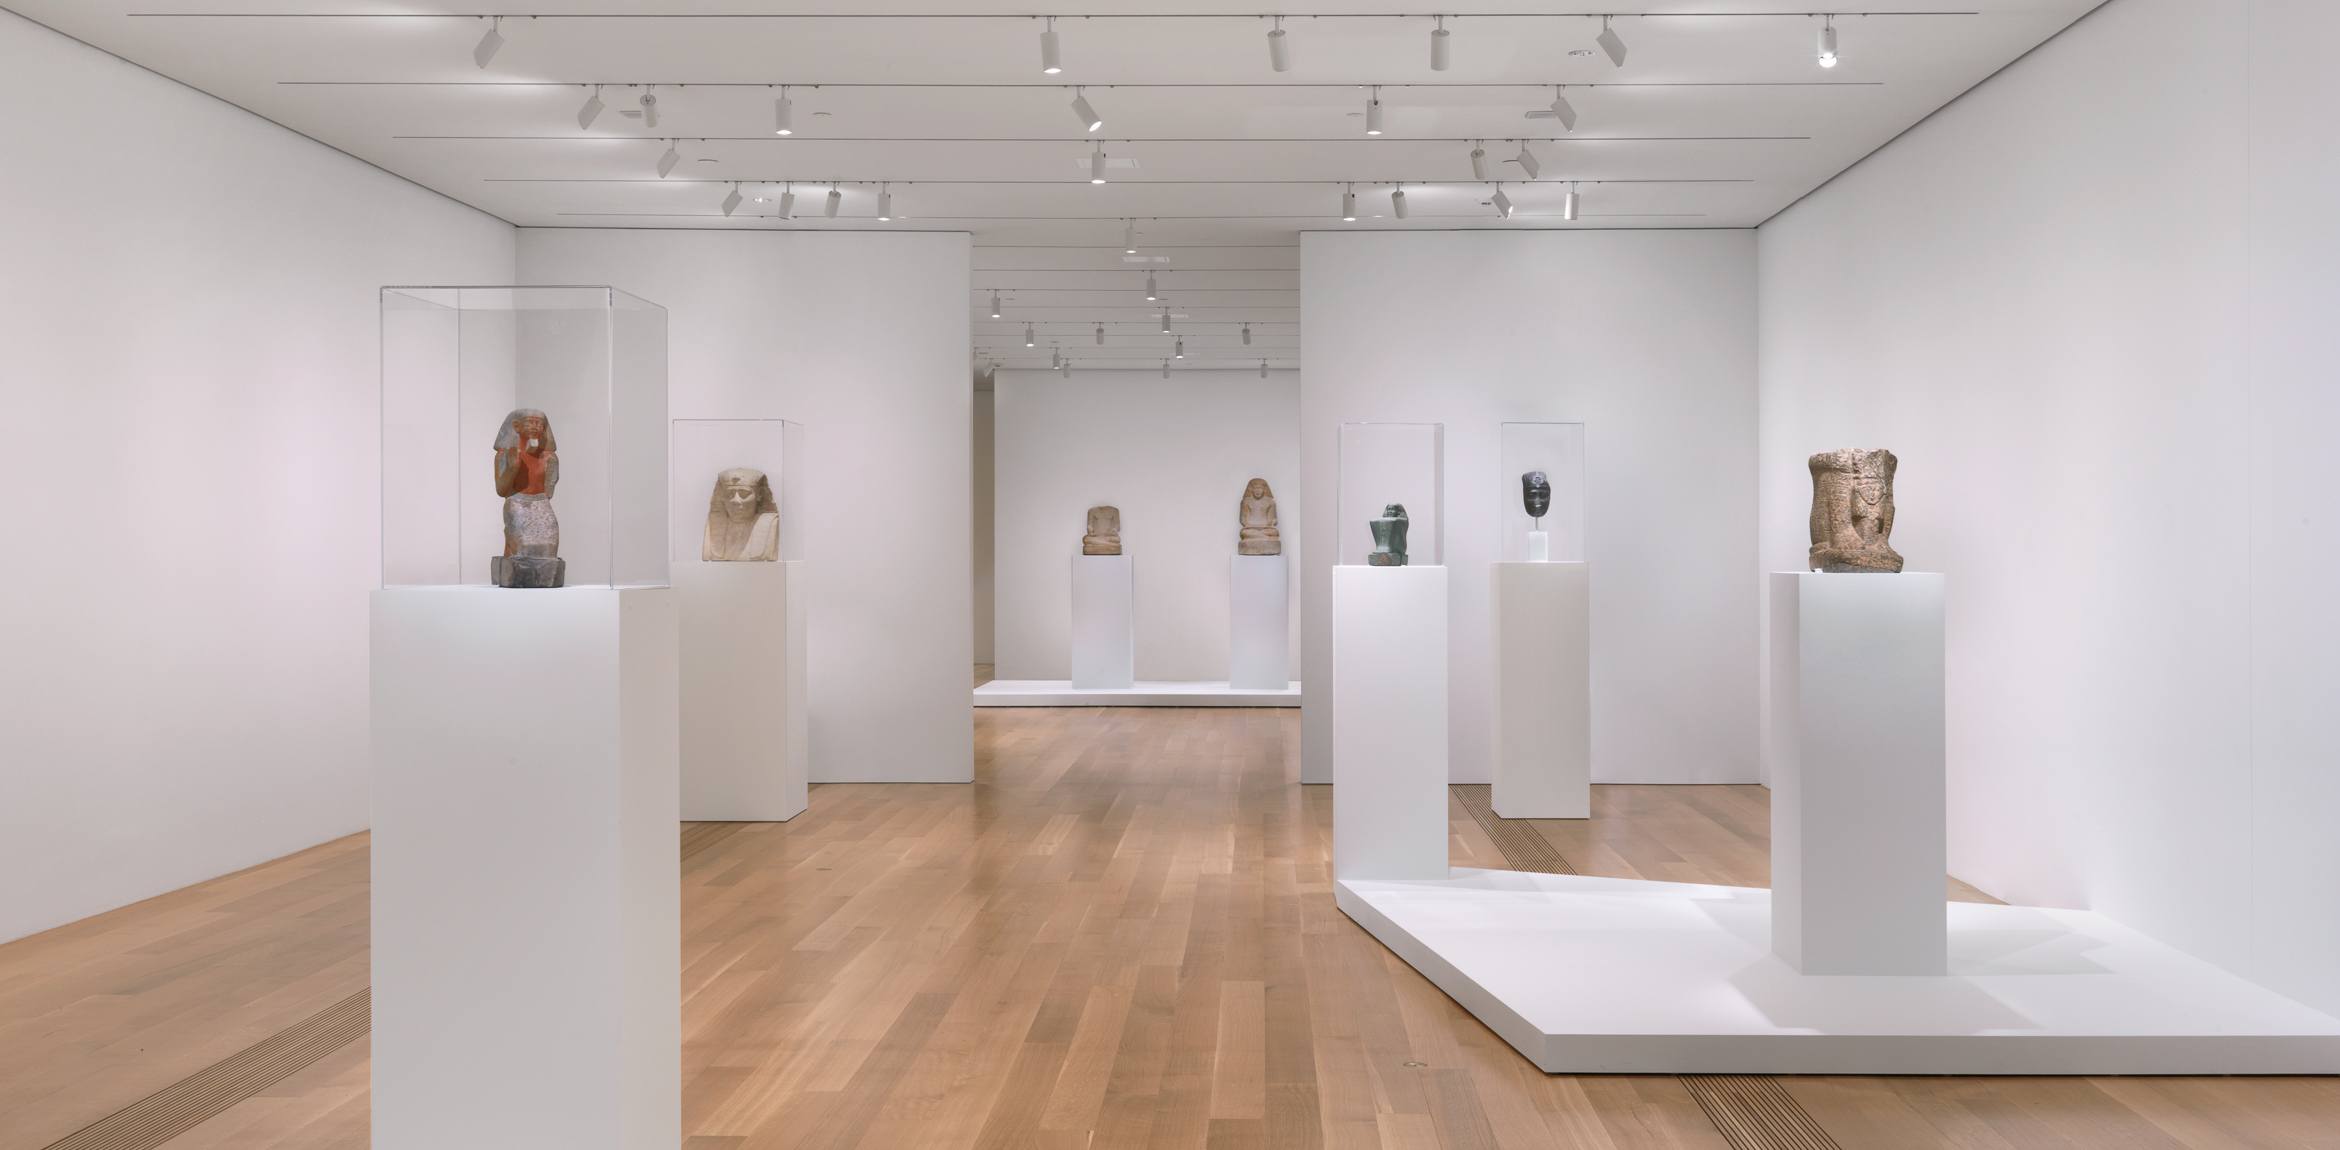 A view of Egyptian artifacts and sculptures on pedestals and vitrines in the Lower East Gallery.